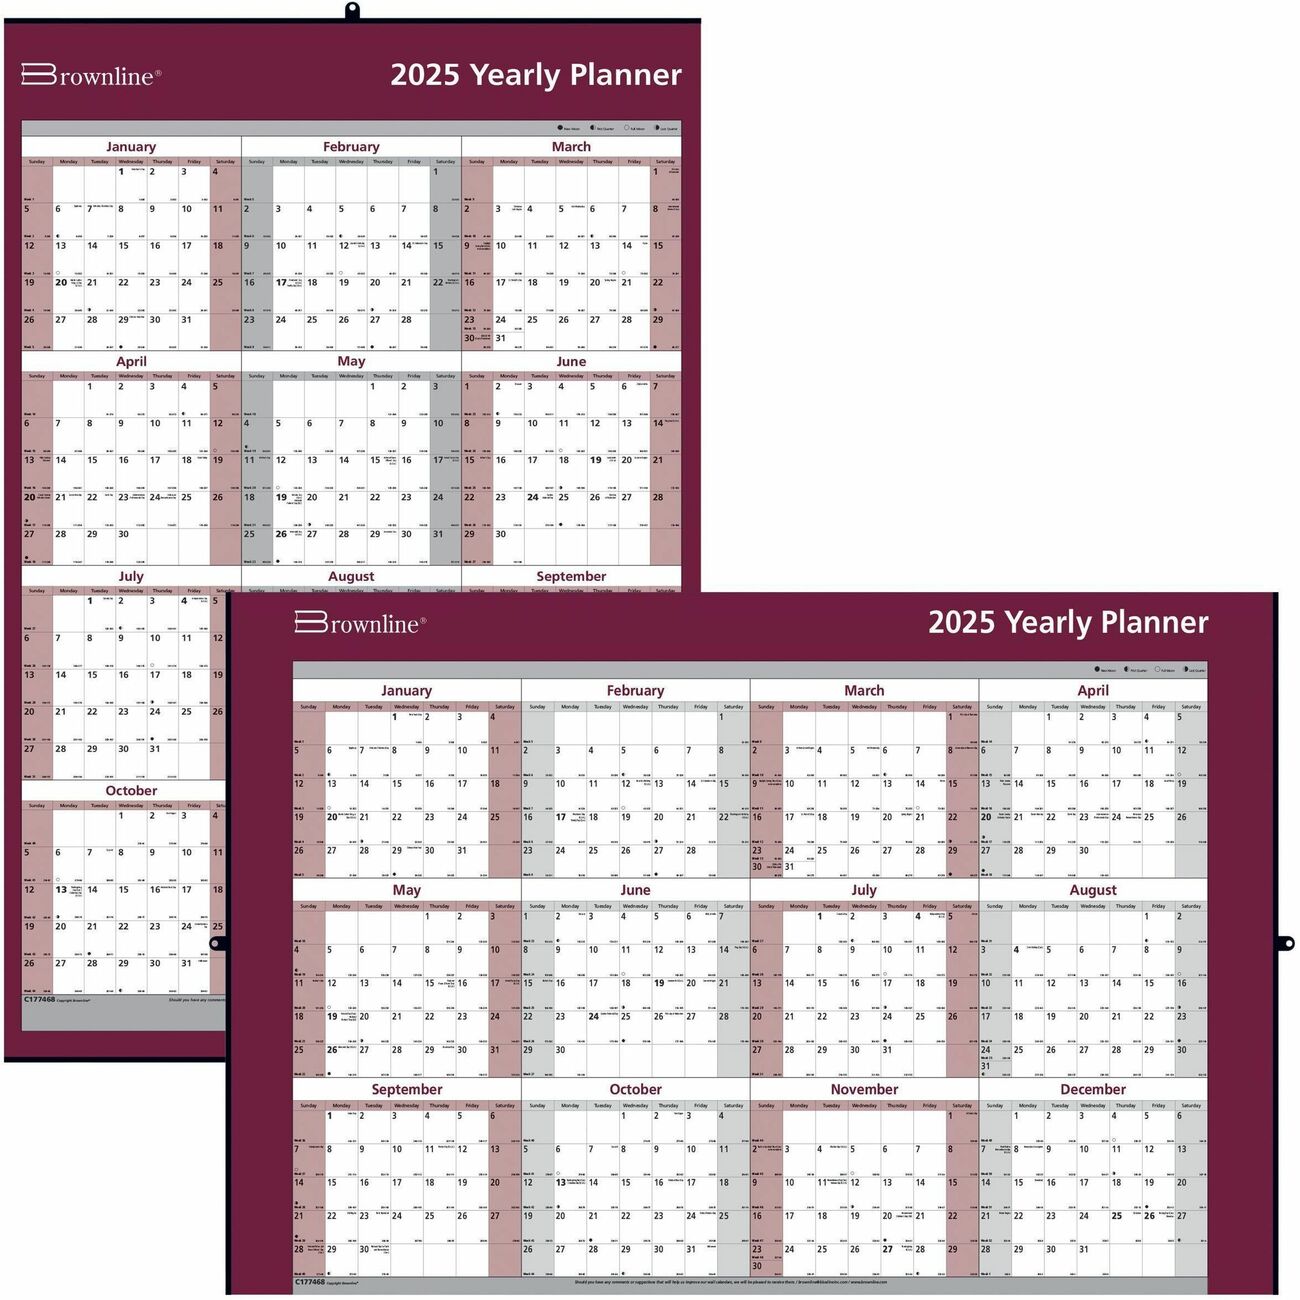 Glennco Office Products Ltd Office Supplies Calendars And Planners